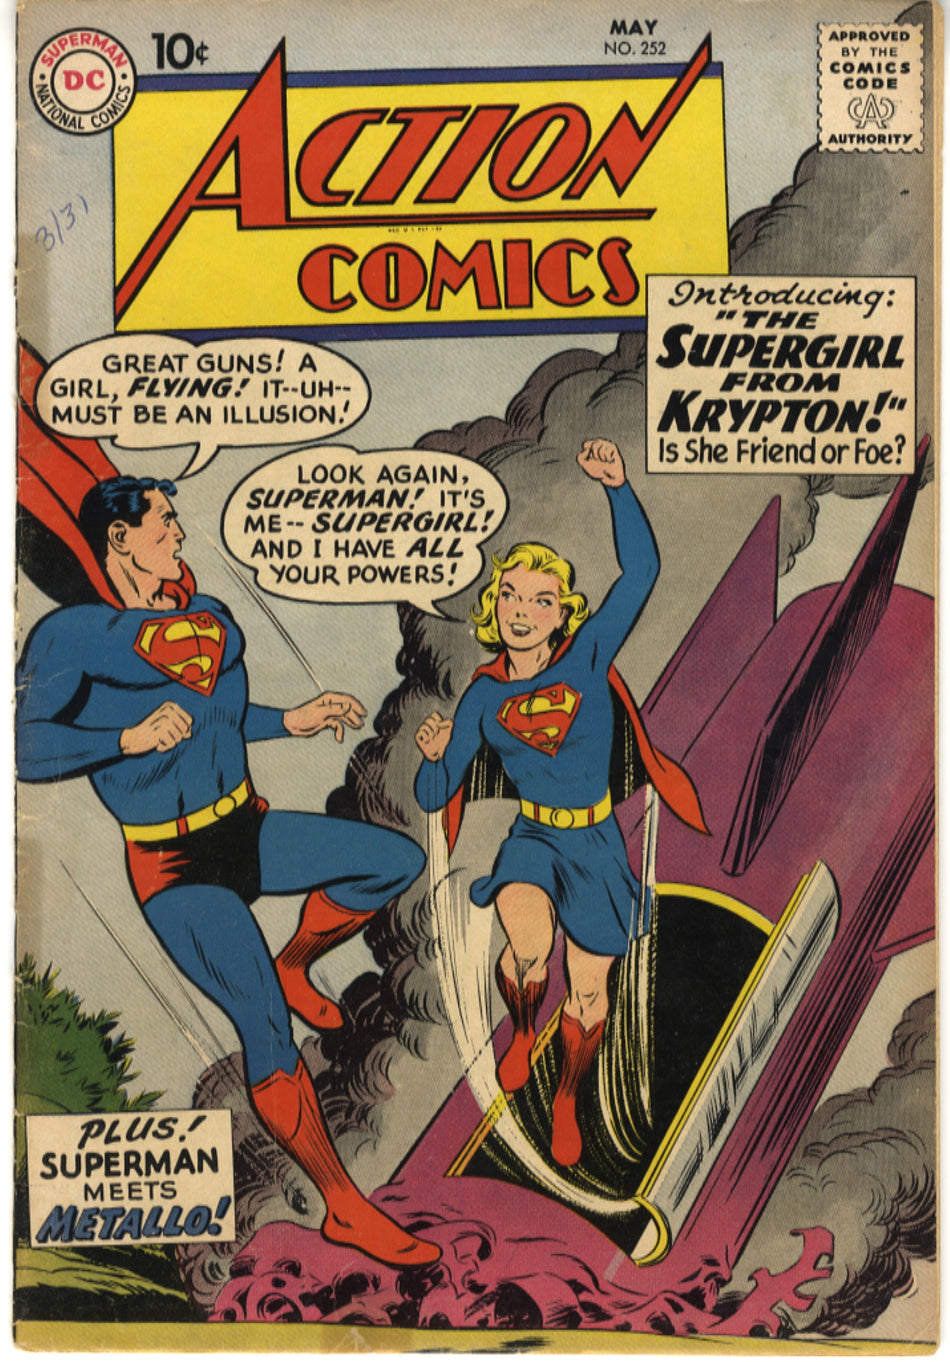 ACTION COMICS 252 VG+ (4.5) Repaired